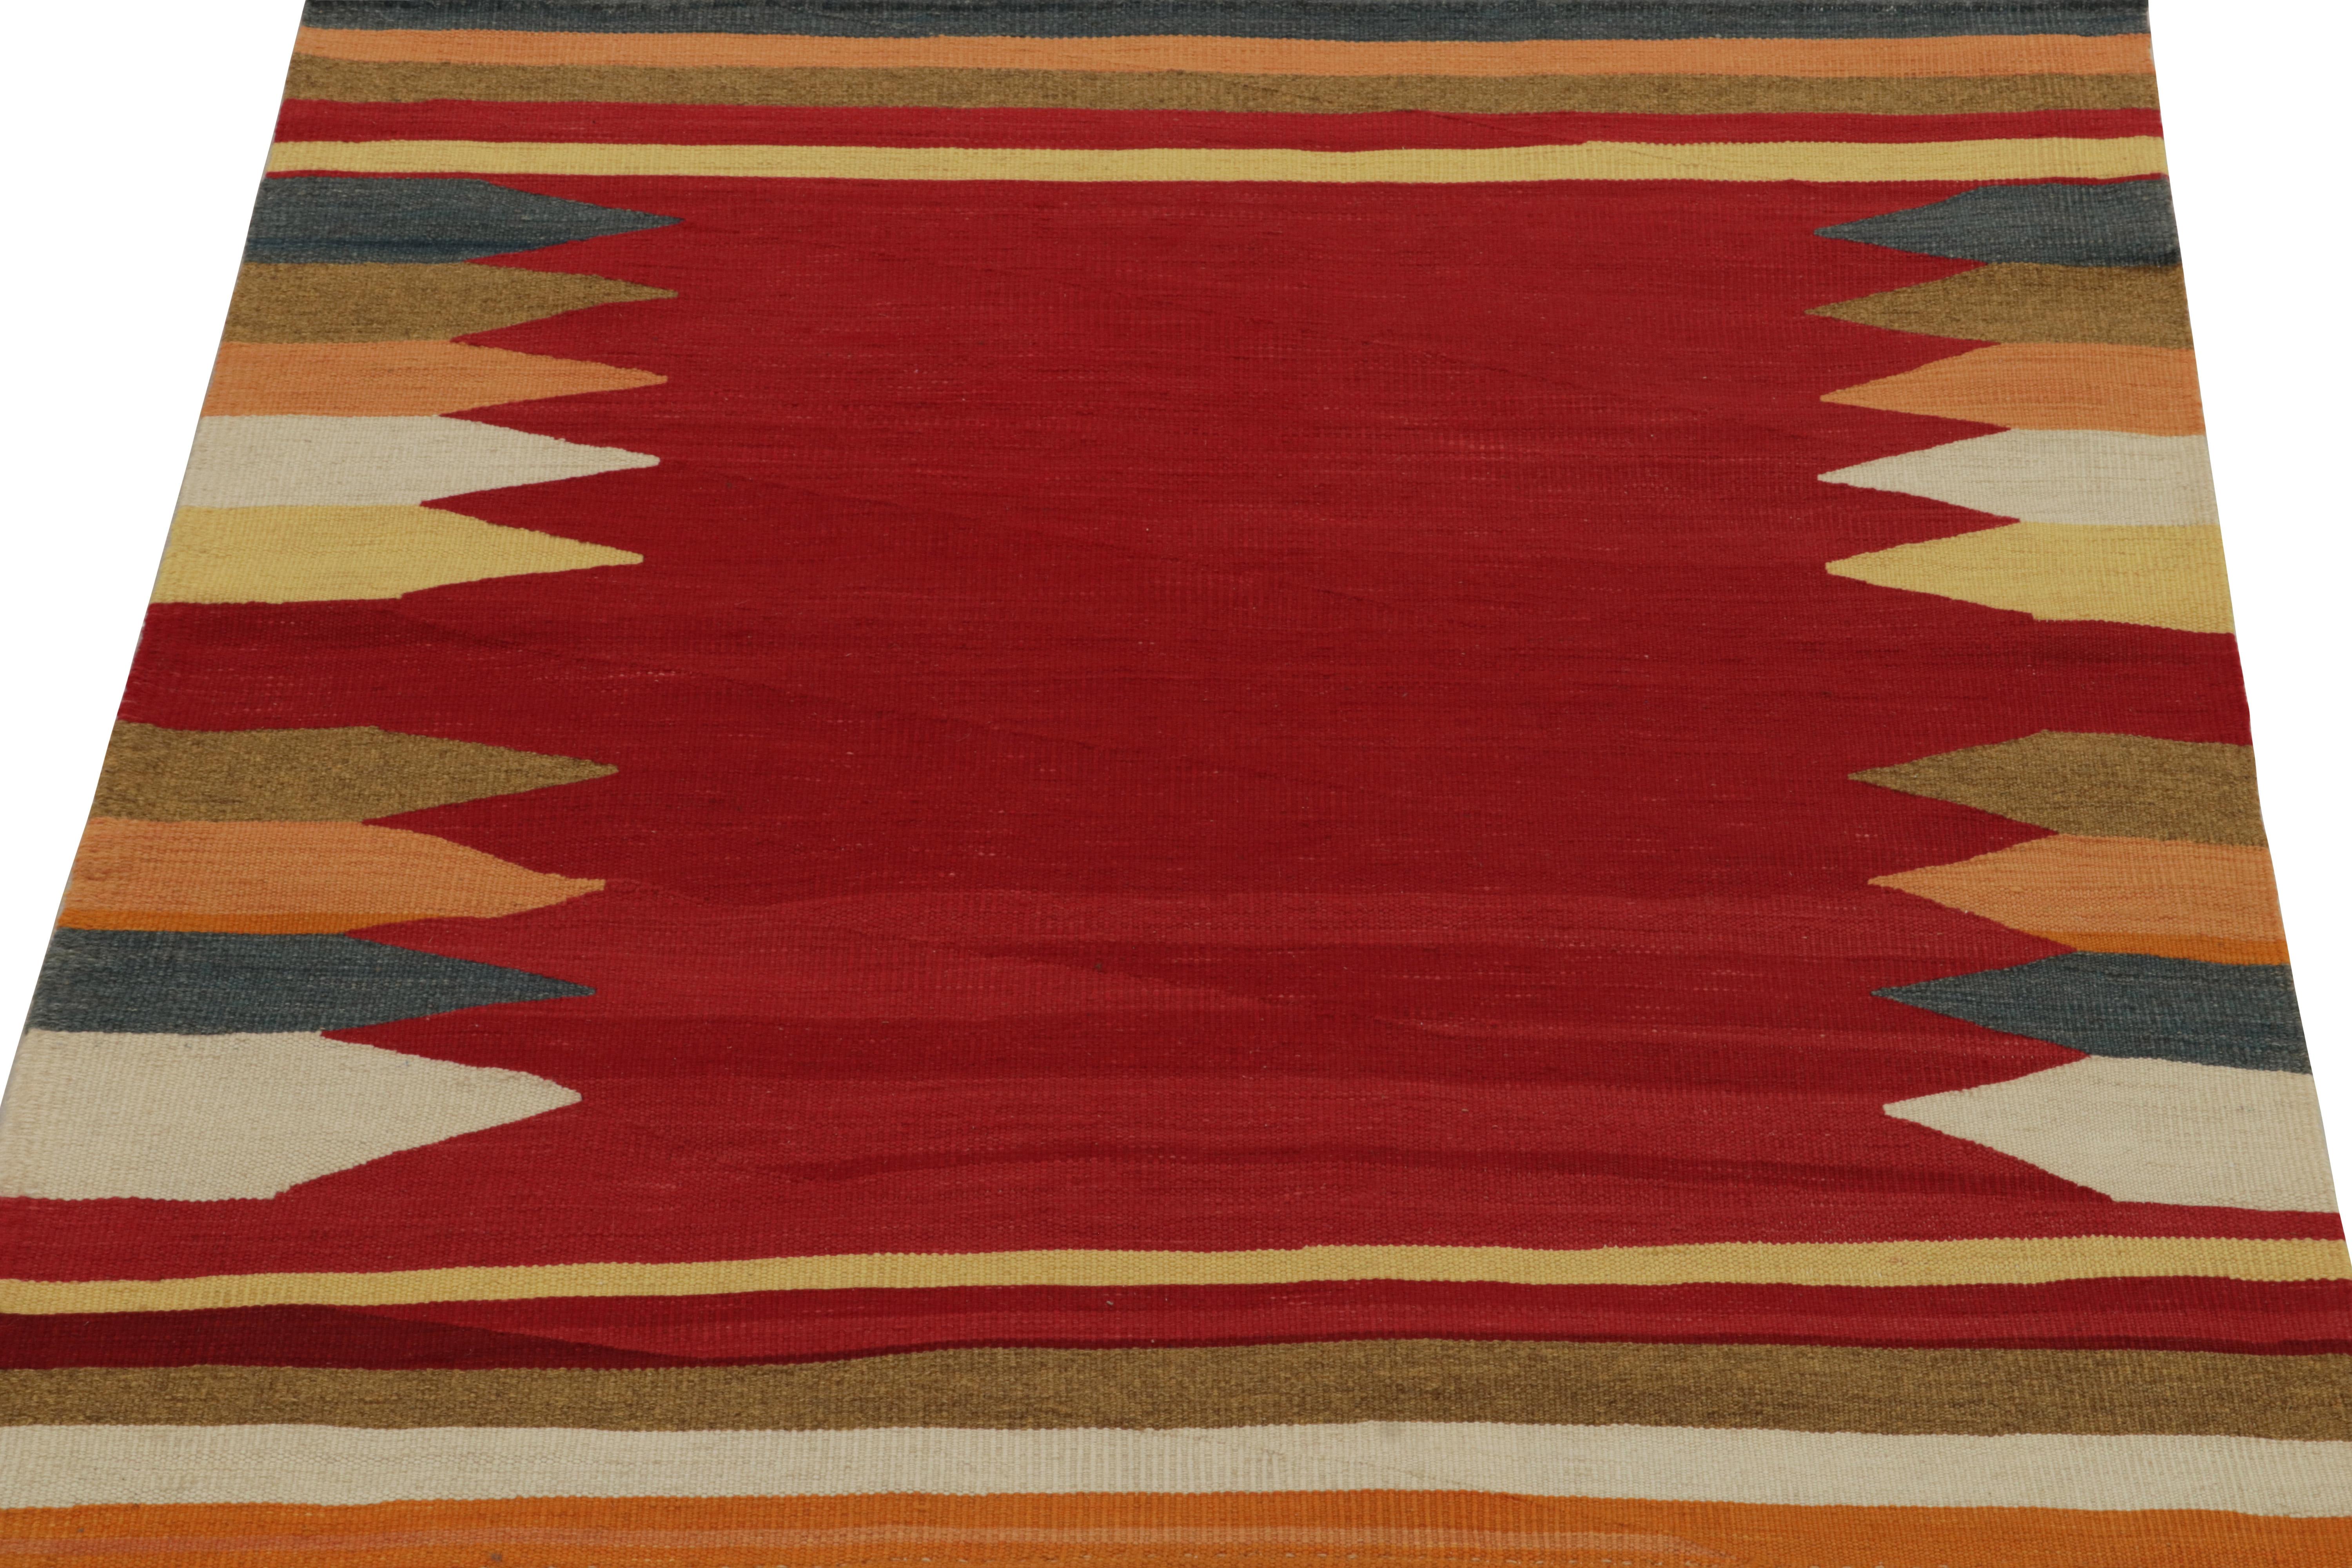 Handwoven in wool circa 1980-1990, from a rare vintage curation of small-sized Kilims newly unveiled from our classic collections. Referred to as Sofreh rugs, distinguished for both style and durability among Persian flat weaves of their time.